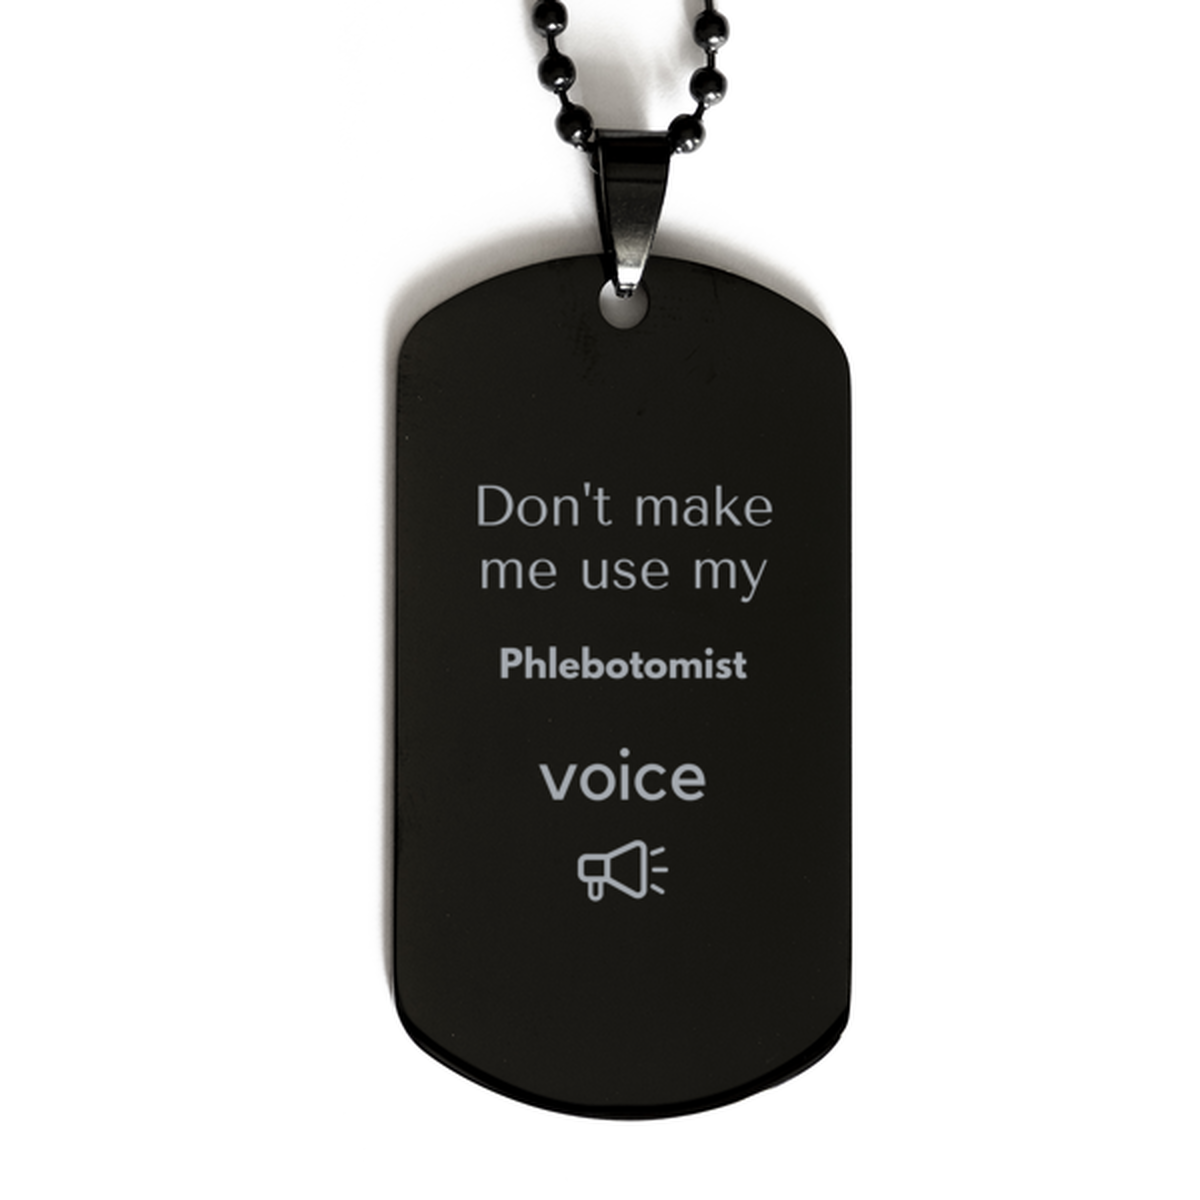 Don't make me use my Phlebotomist voice, Sarcasm Phlebotomist Gifts, Christmas Phlebotomist Black Dog Tag Birthday Unique Gifts For Phlebotomist Coworkers, Men, Women, Colleague, Friends